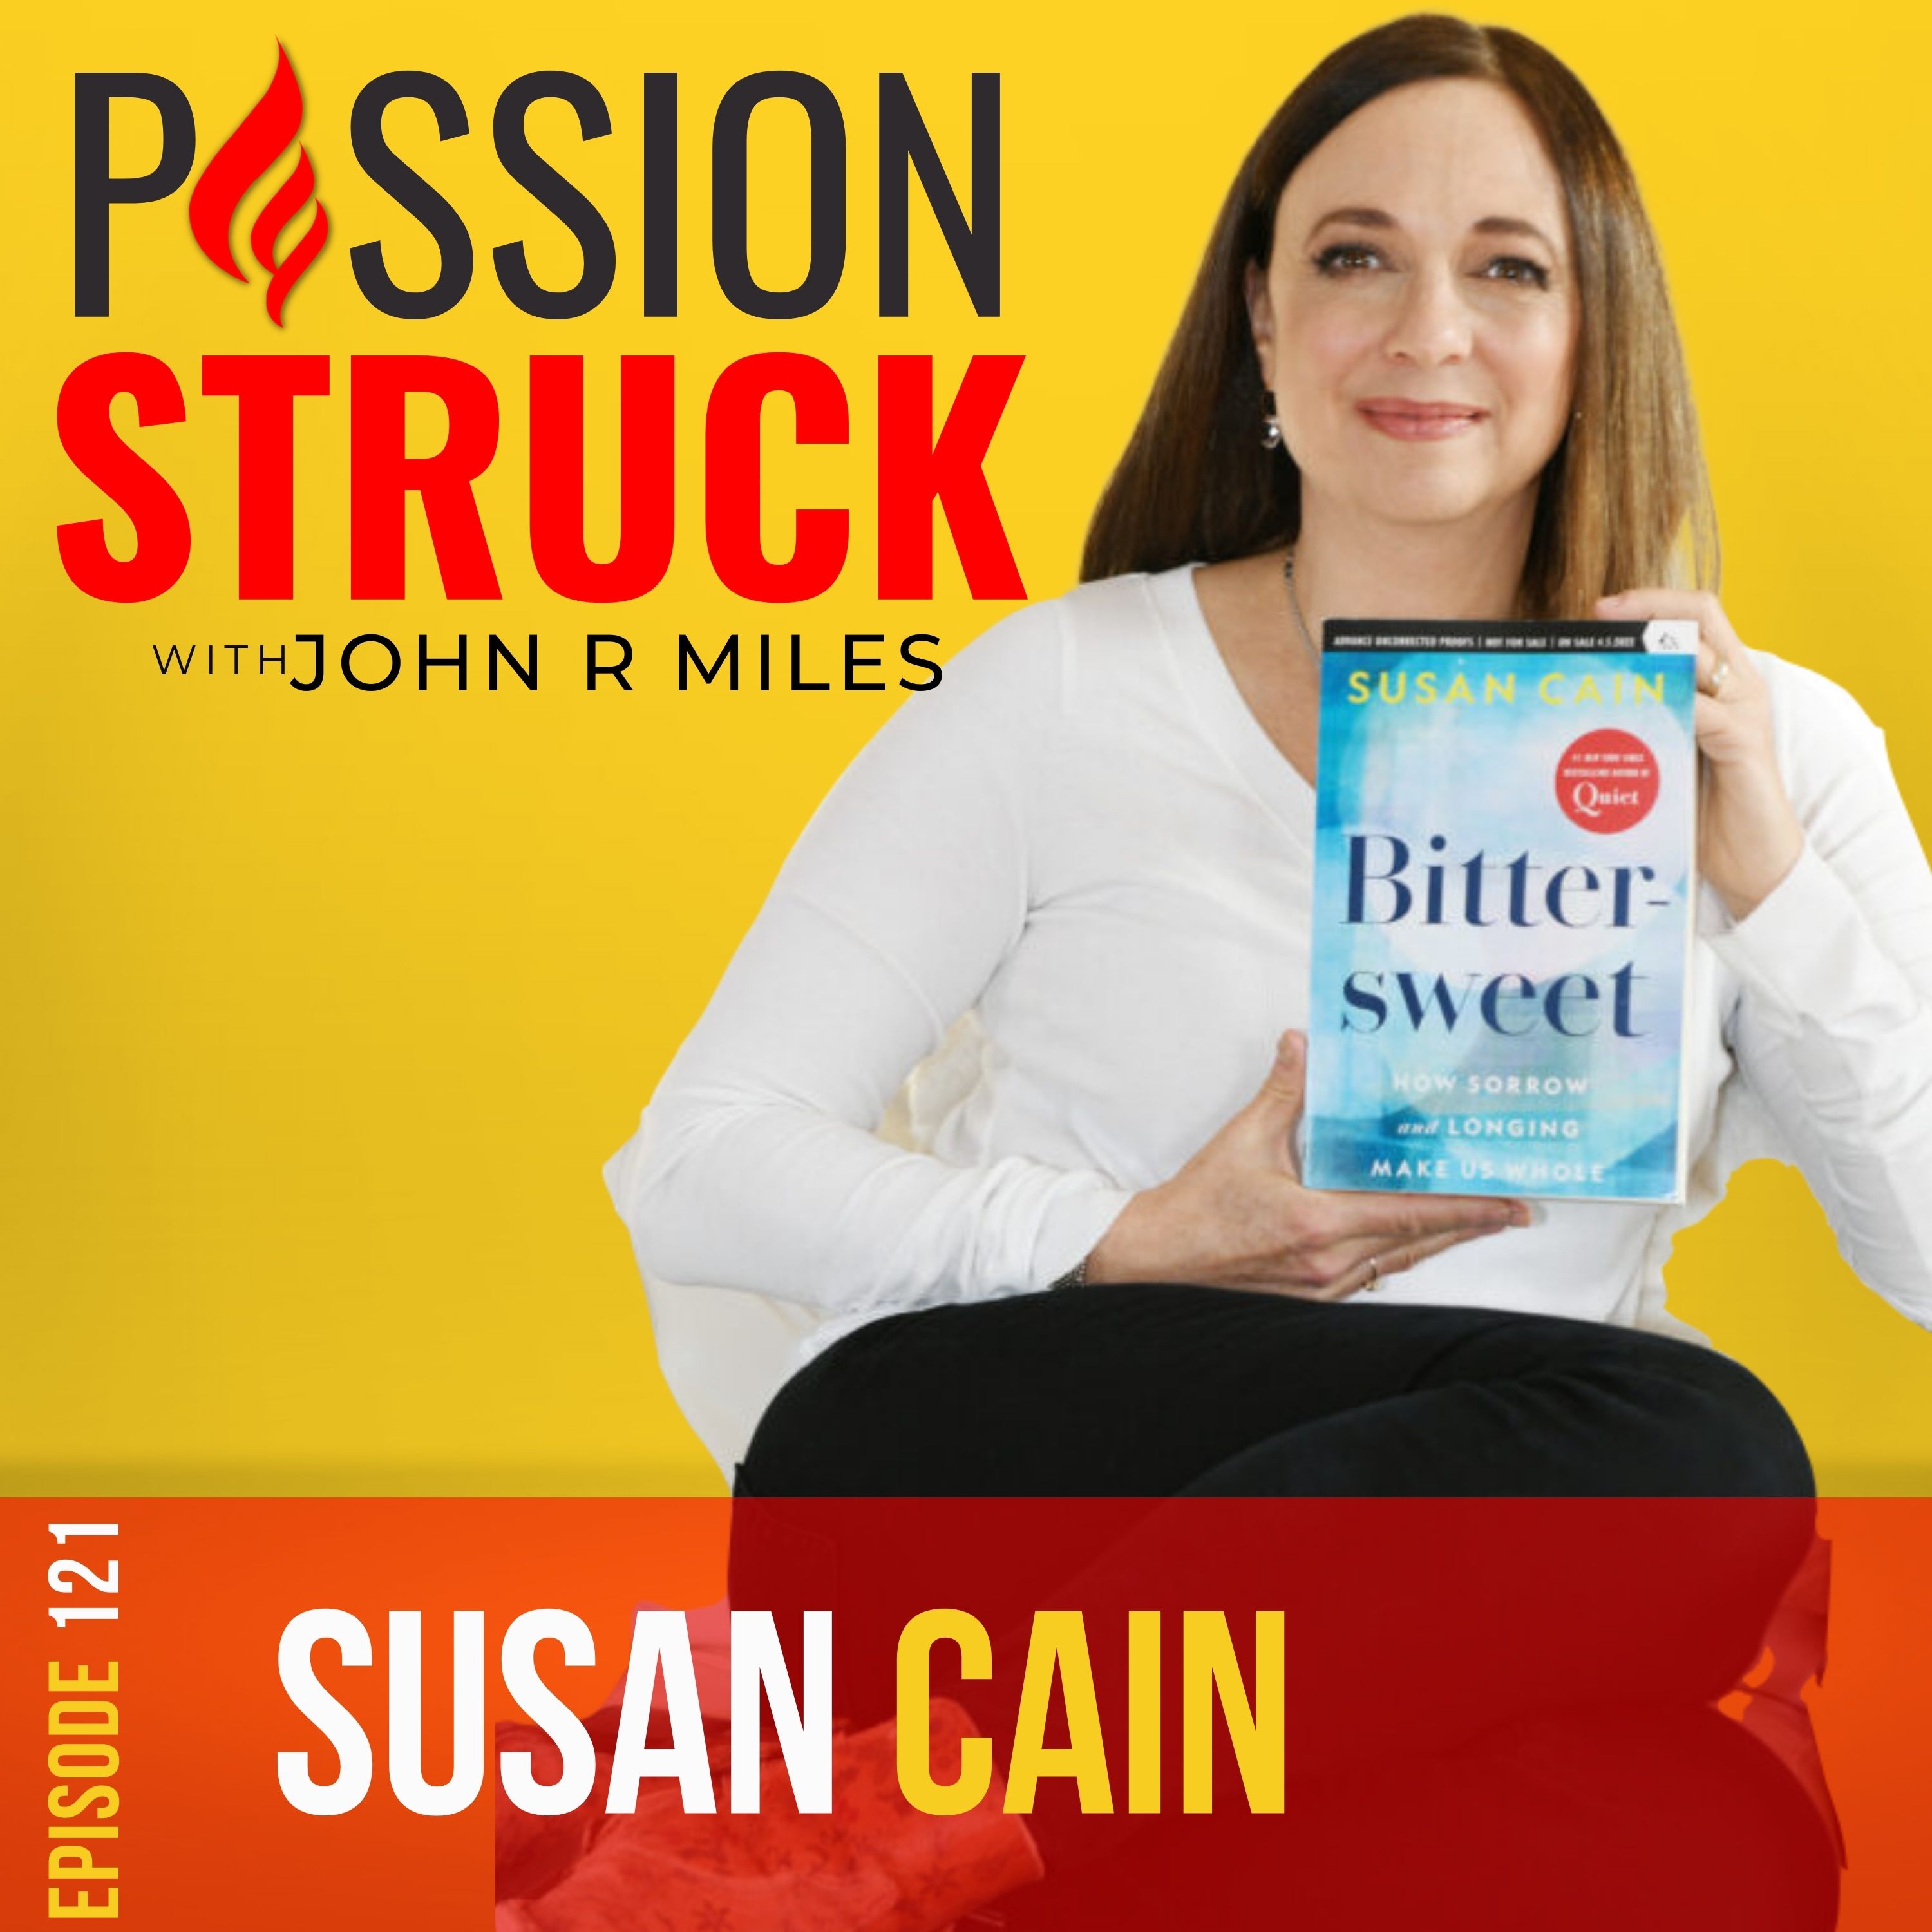 Susan Cain album cover for episode 121 of Passion Struck with John R. Miles